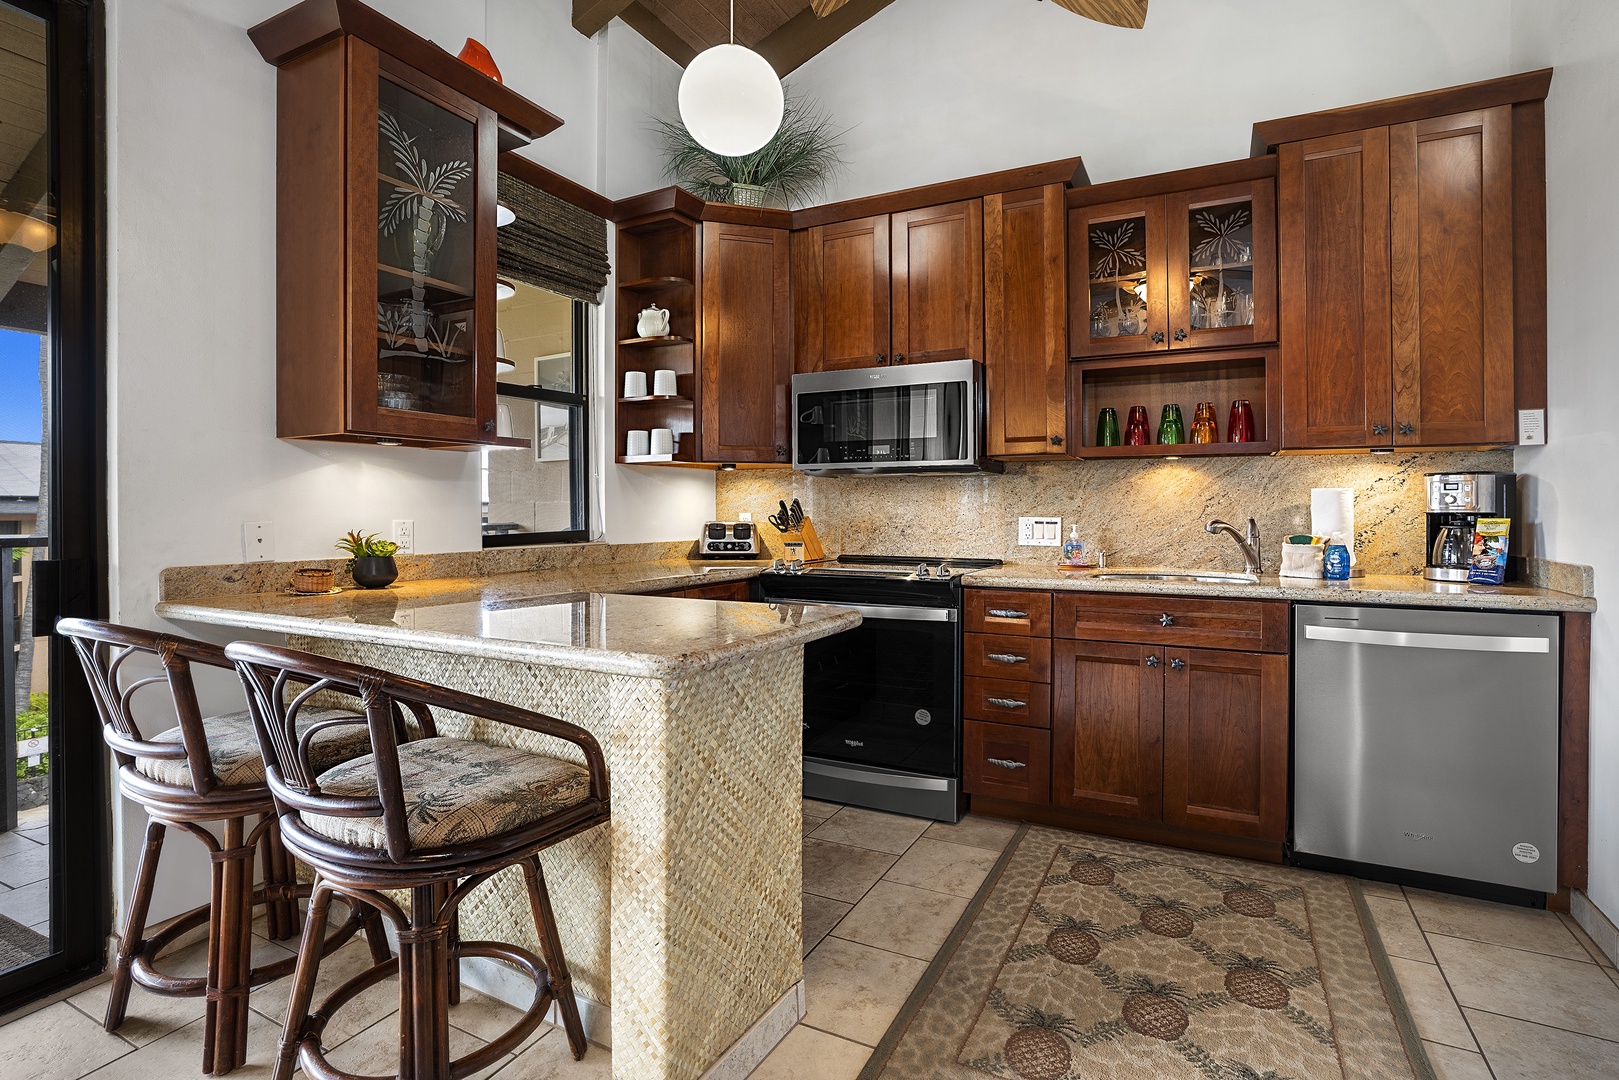 Kailua Kona Vacation Rentals, Kona Makai 6305 - Upgraded kitchen and appliances with all the essentials to prepare home cooked meals!